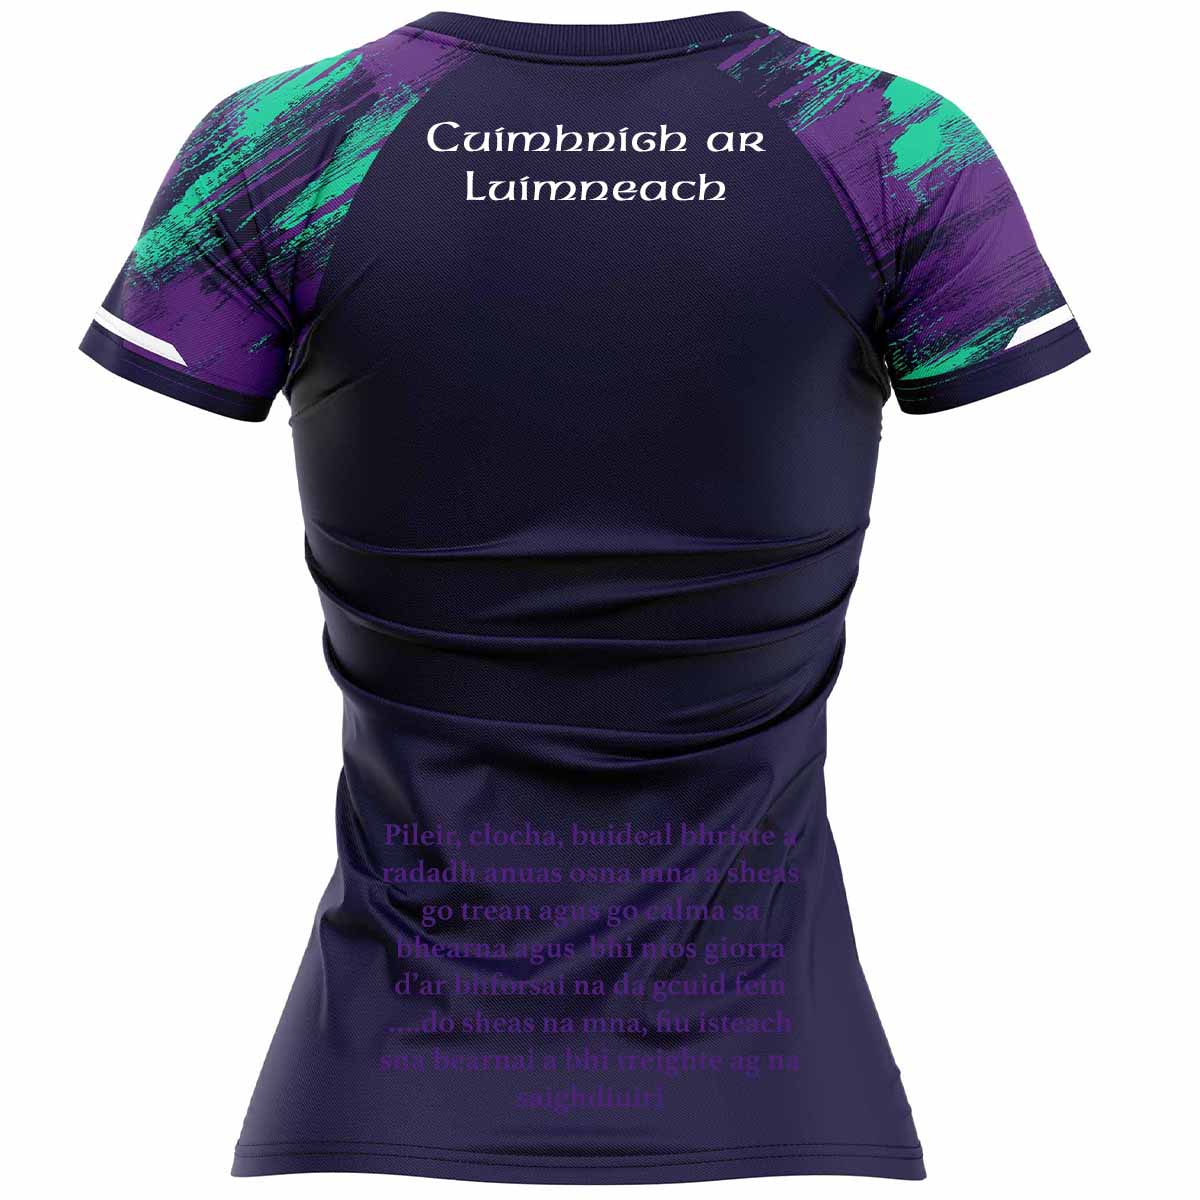 Mc Keever Limerick Camogie Official Training Jersey - Youth - Navy/Purple